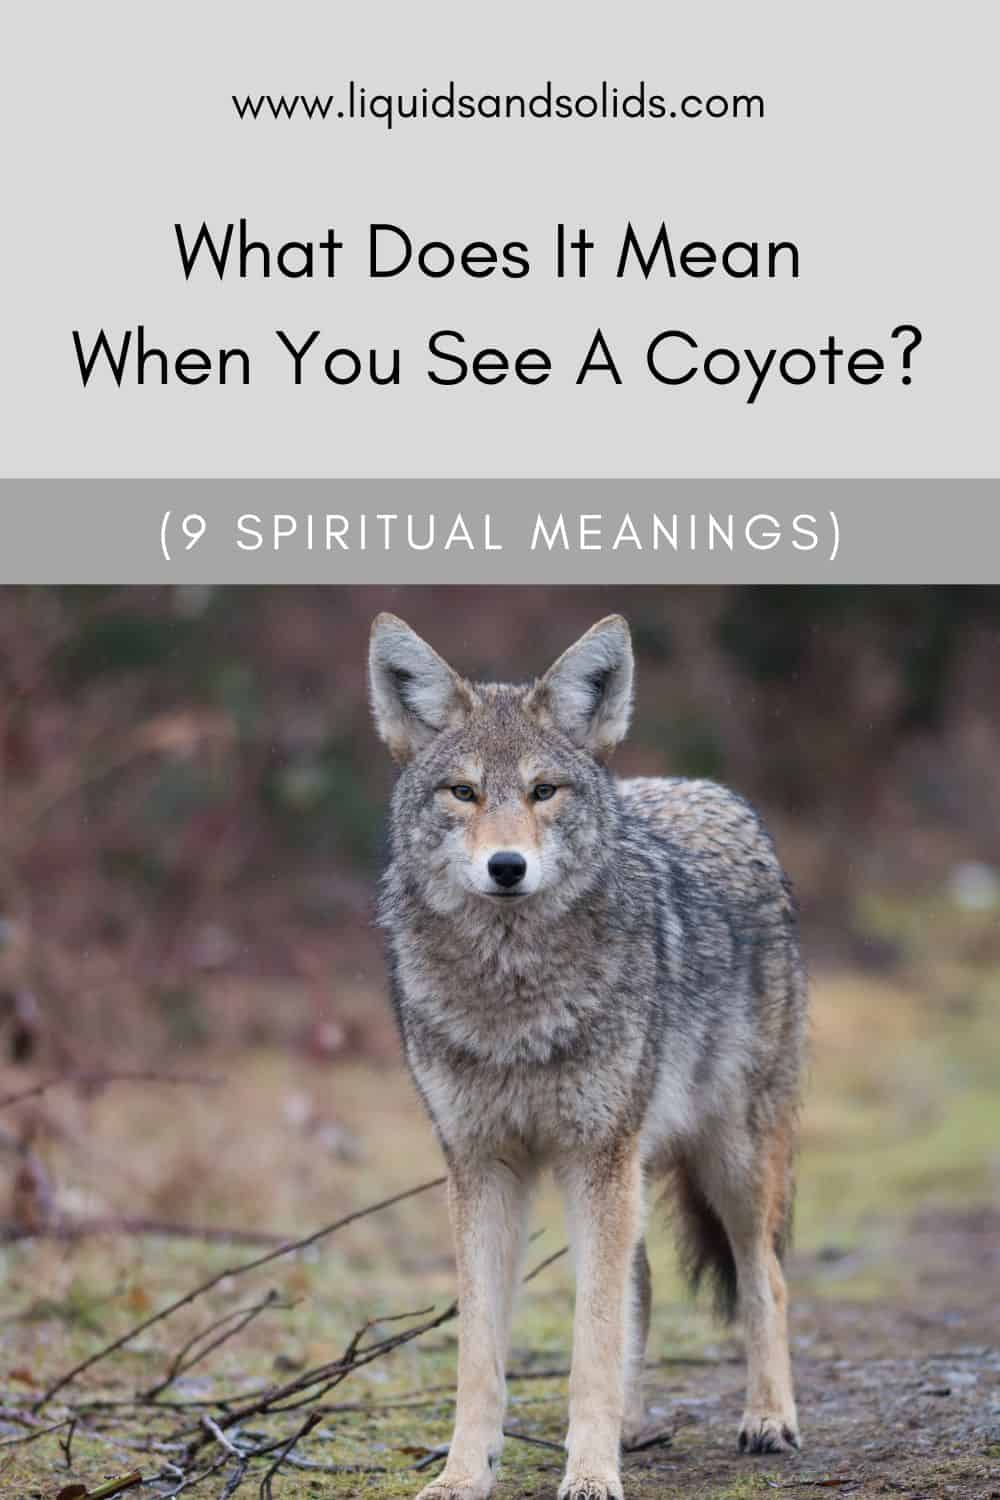 What Does It Mean When You See A Coyote? (9 Spiritual Meanings)